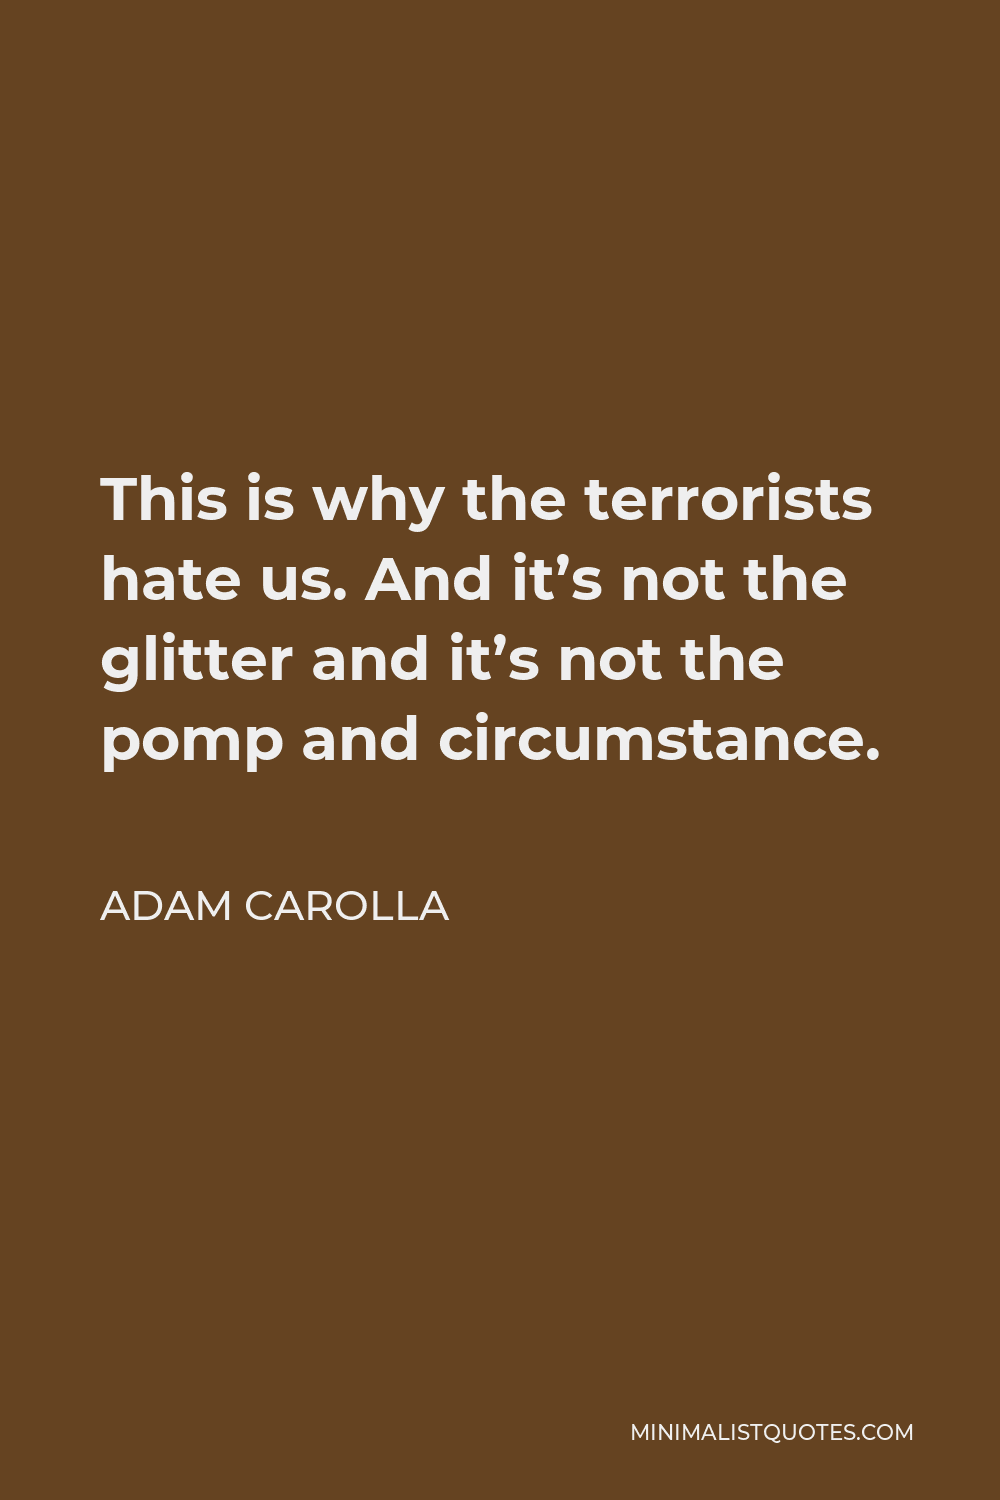 Adam Carolla Quote - This is why the terrorists hate us. And it’s not the glitter and it’s not the pomp and circumstance.